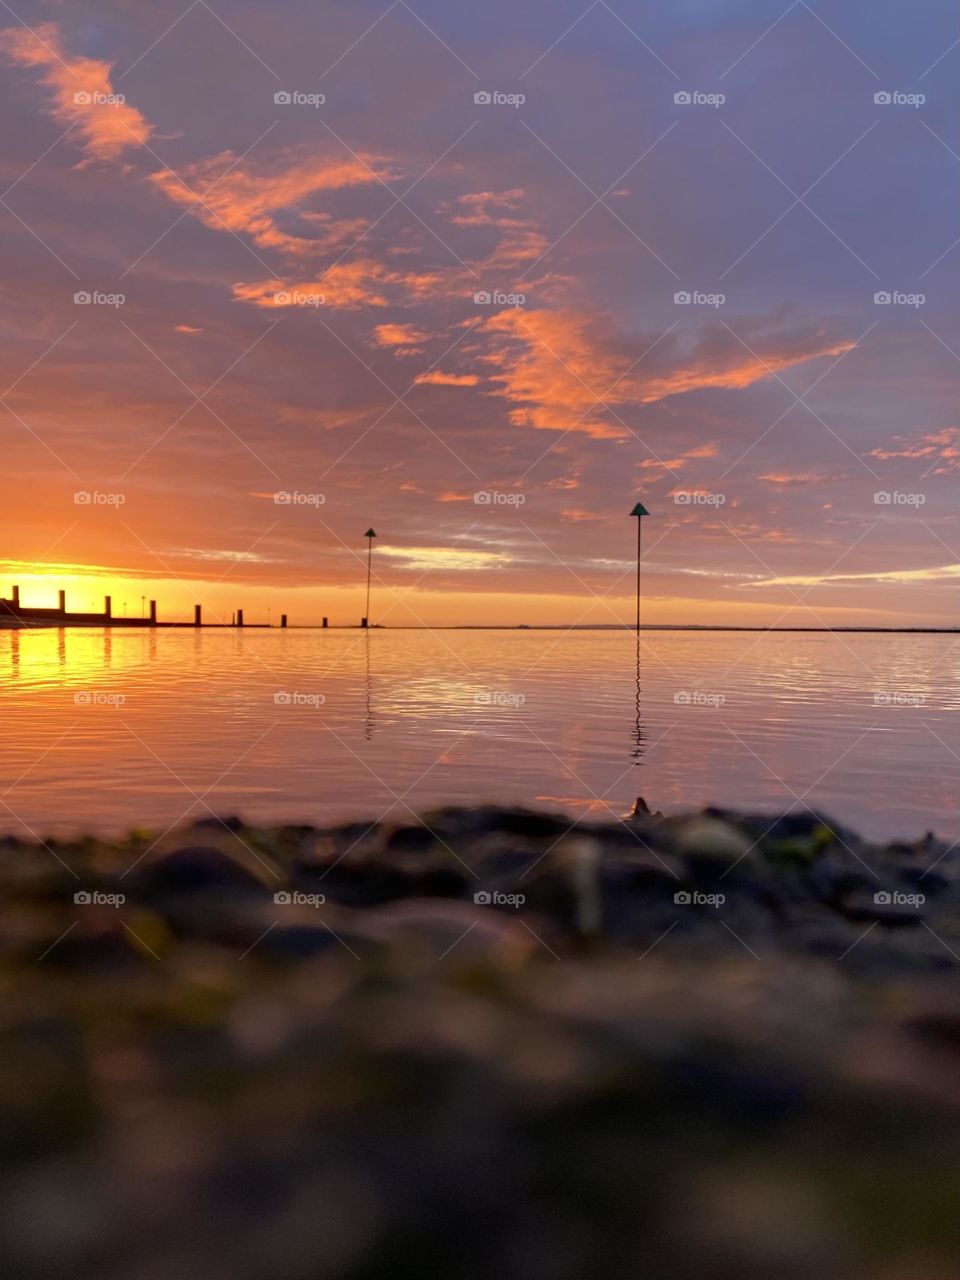 A warm beach sunrise photo with water reflections 